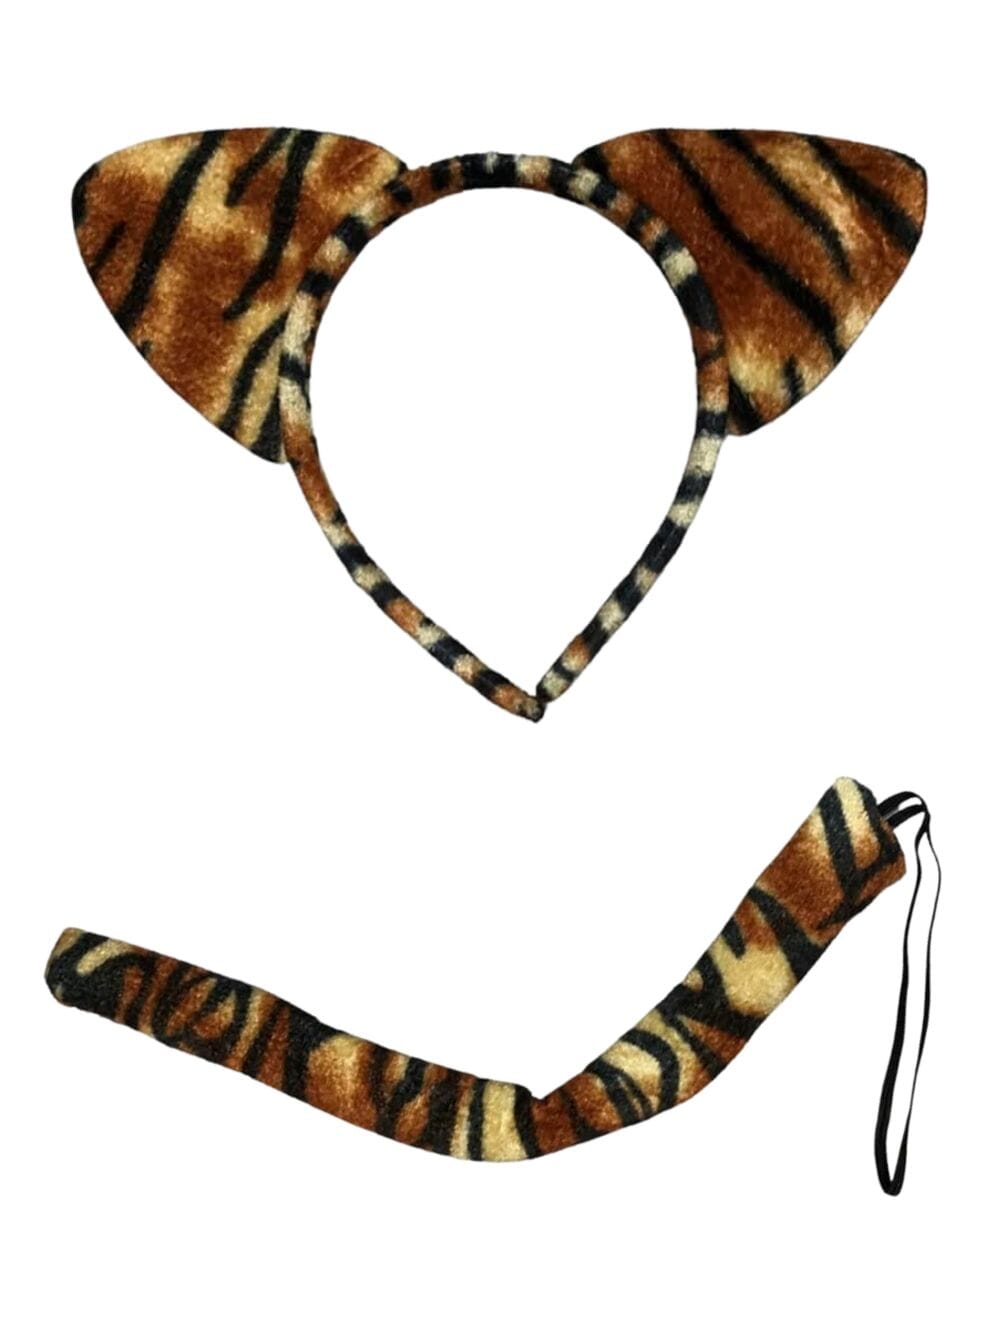 Tiger Headband Ears & Tail, Kid or Adult Size Costume Accessories - Sydney So Sweet